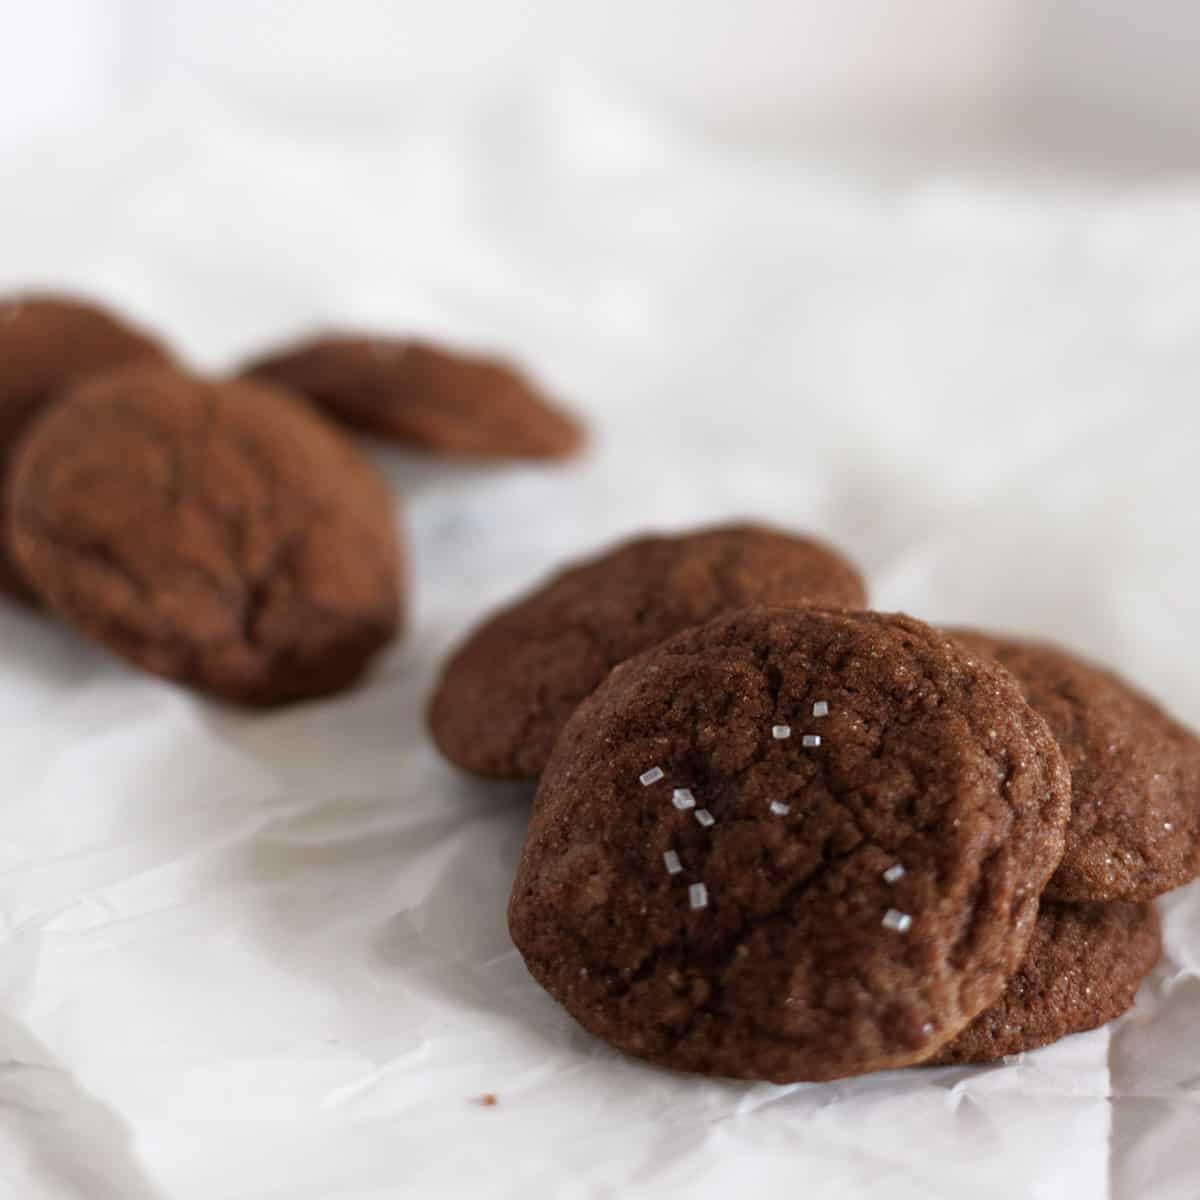 Chocolate Snickerdoodle cookies on parchment paper.